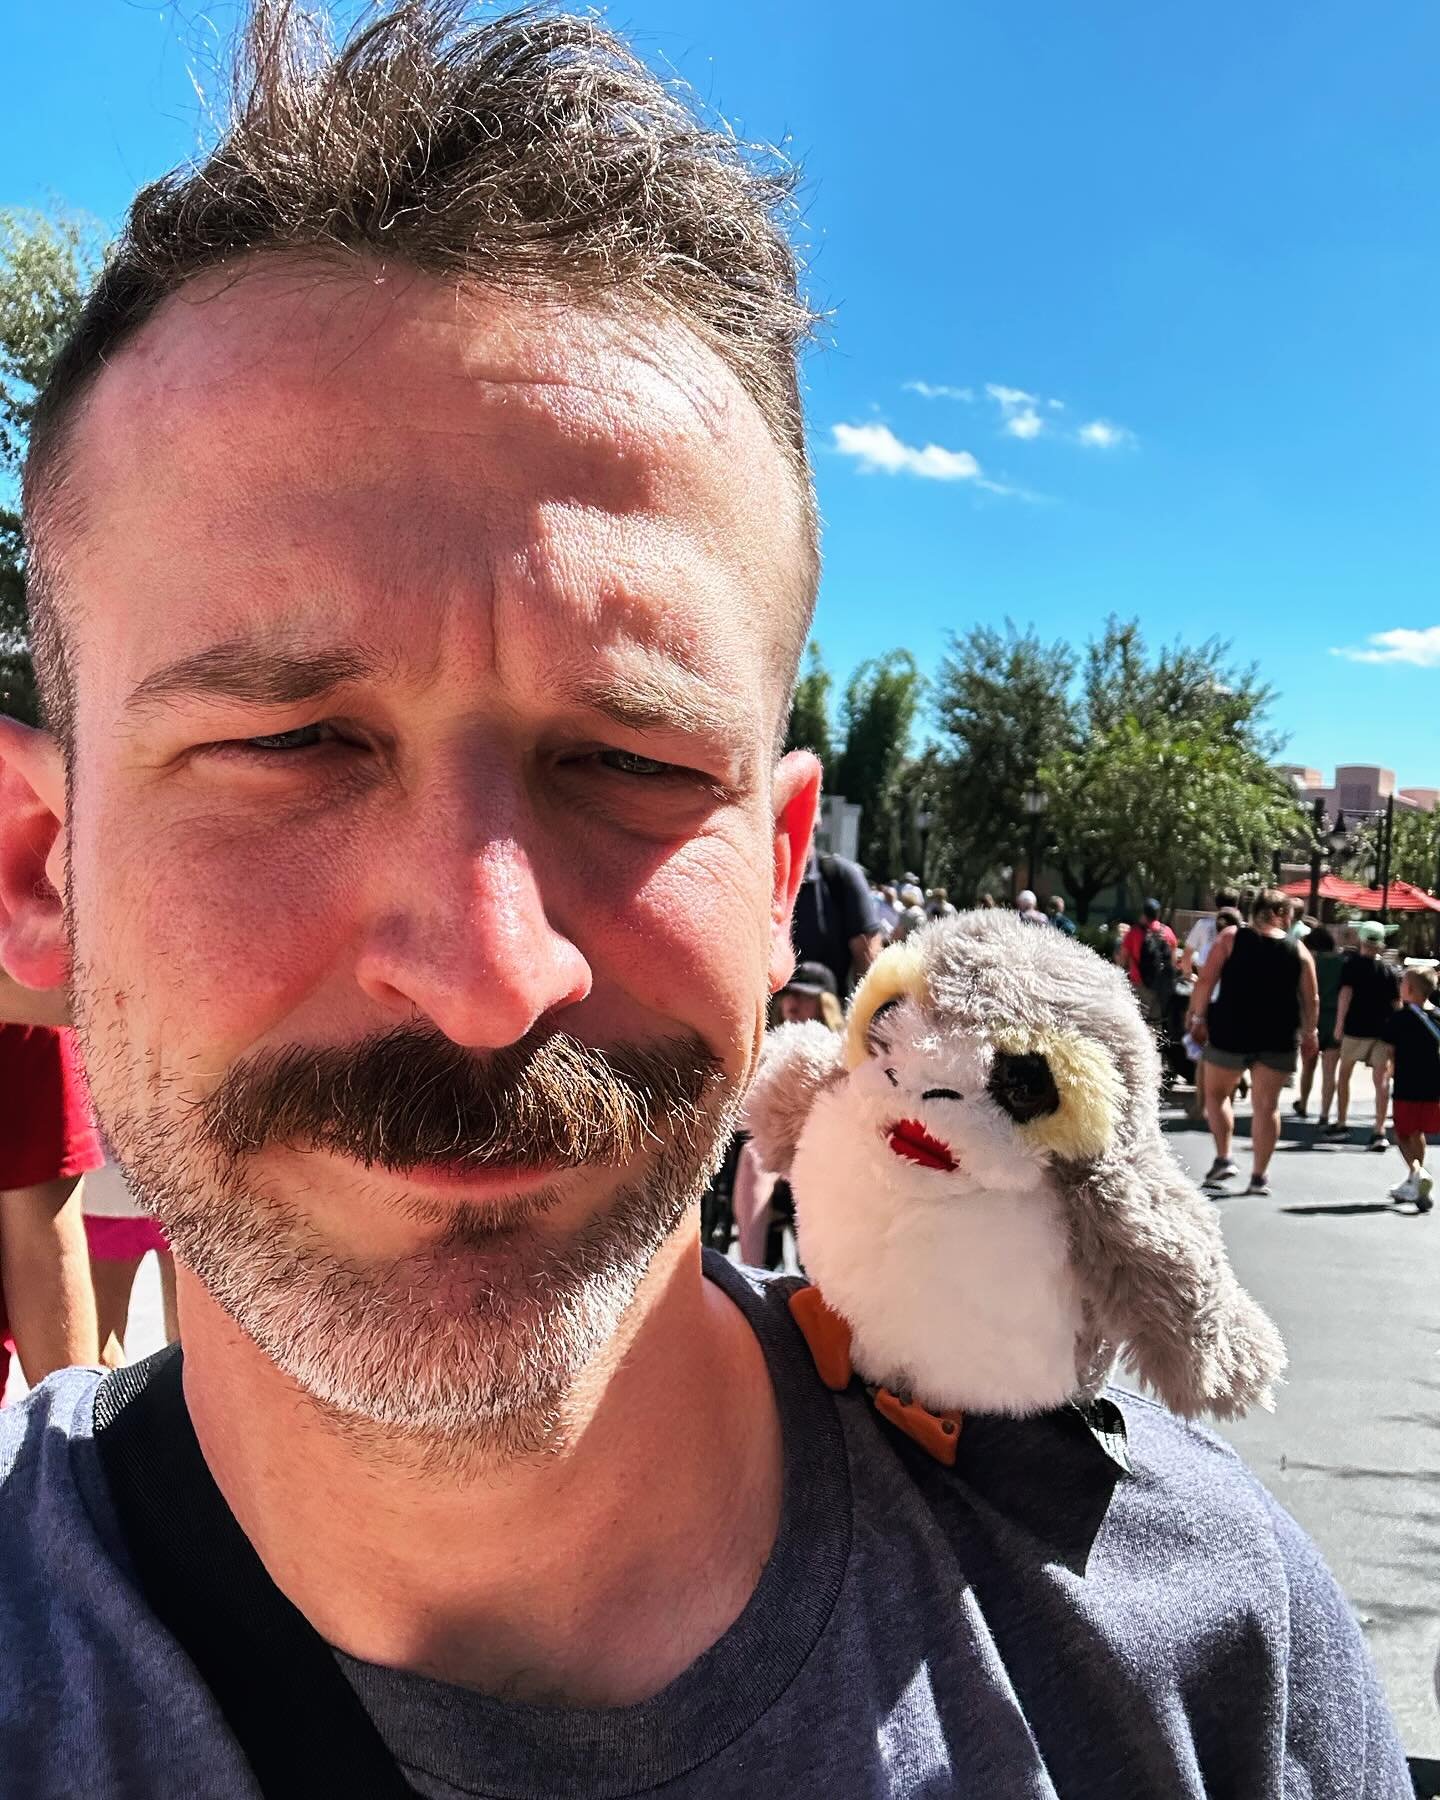 May The Porg Be With You. Or maybe I heard it wrong 🤷&zwj;♂️ I do love my cute little buddy. Still needs a name. 

#maythe4thbewithyou #starwars #disney #disneydad #familyadventuresbythedad #onceuponatimevacations #hollywoodstudios #porg #disneyworl